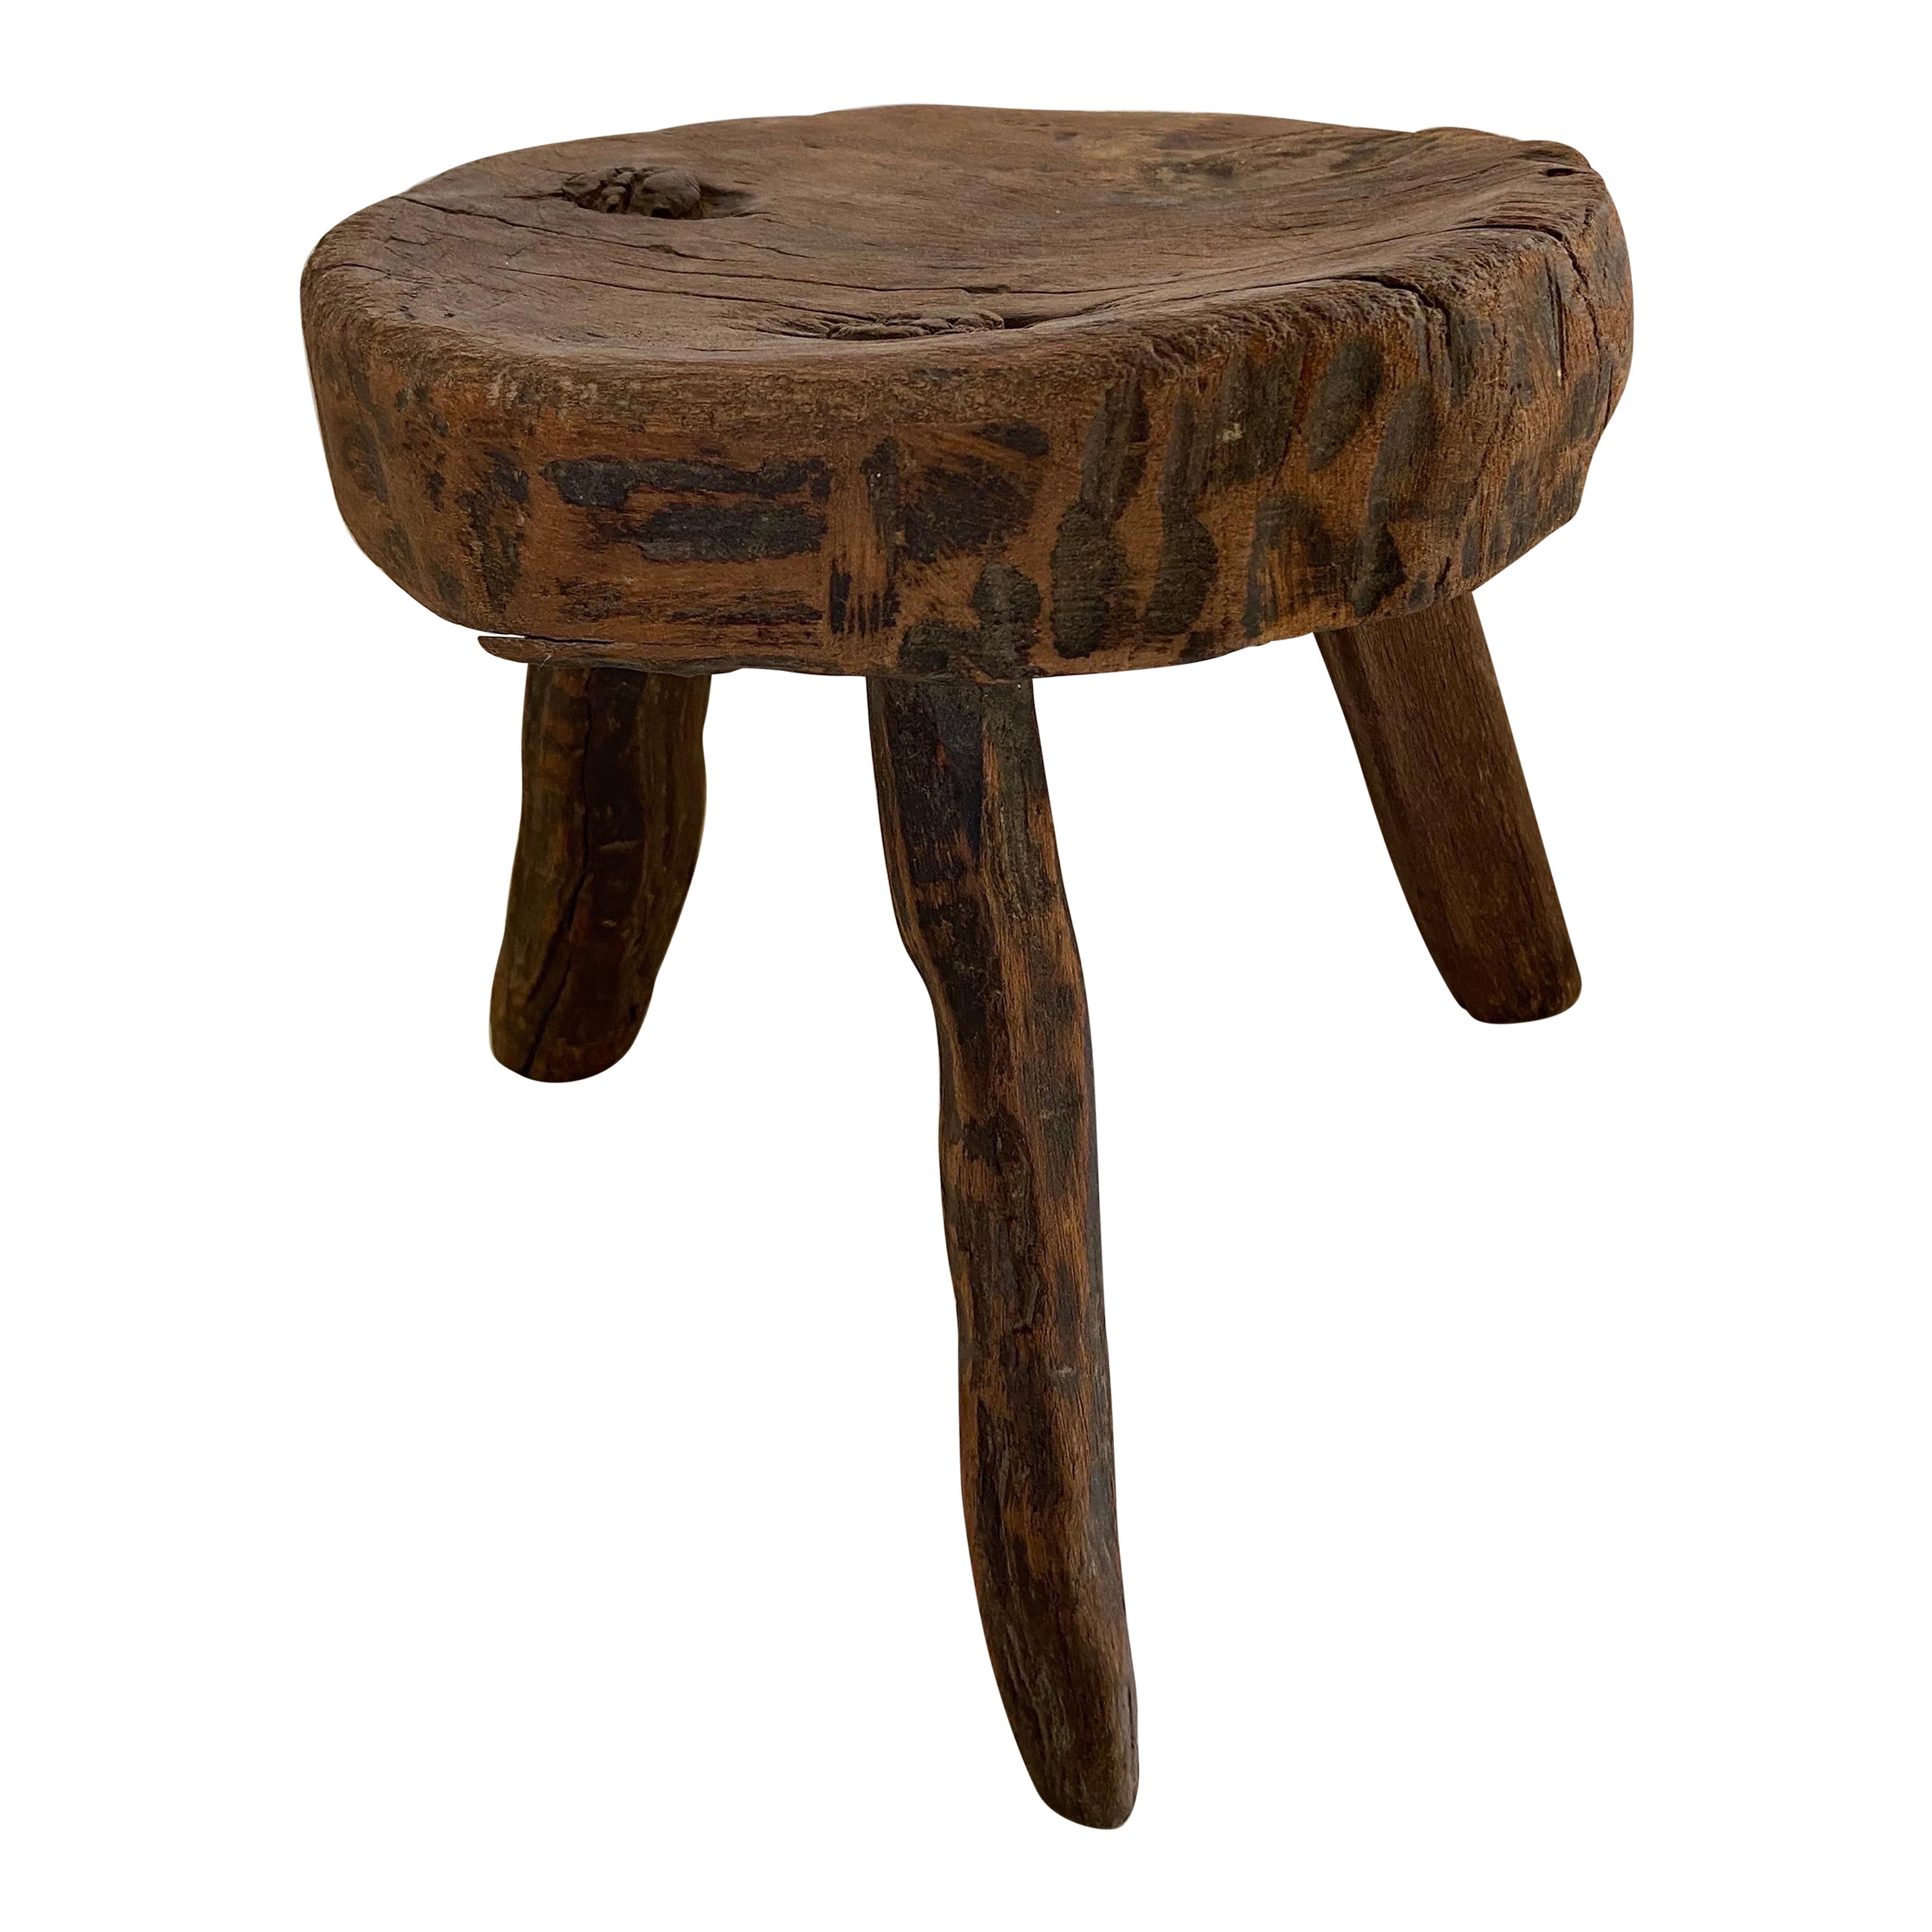 Mid 20th Century Stool From Mexico For Sale